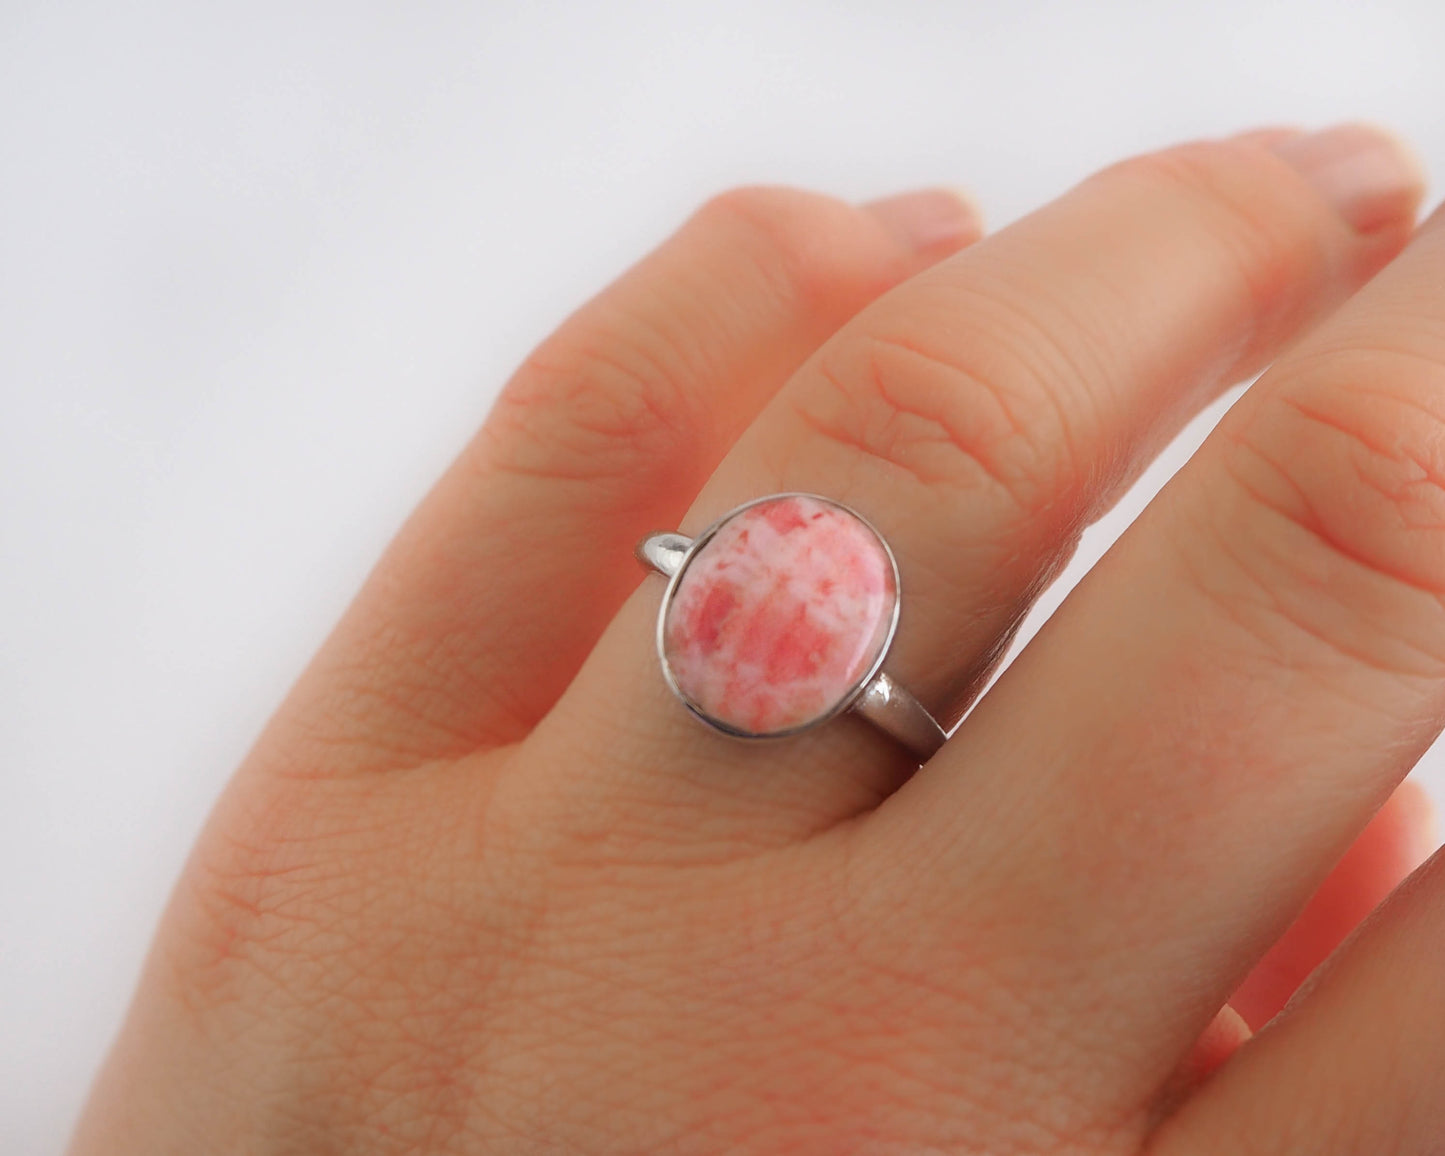 Model Wearing Pink Venus Shell Ring, adjustable 925 Silver Ring, Real Seashell ring, Shell from Portugal, Coastal Jewelry, Beach Girl, Sea by Lou